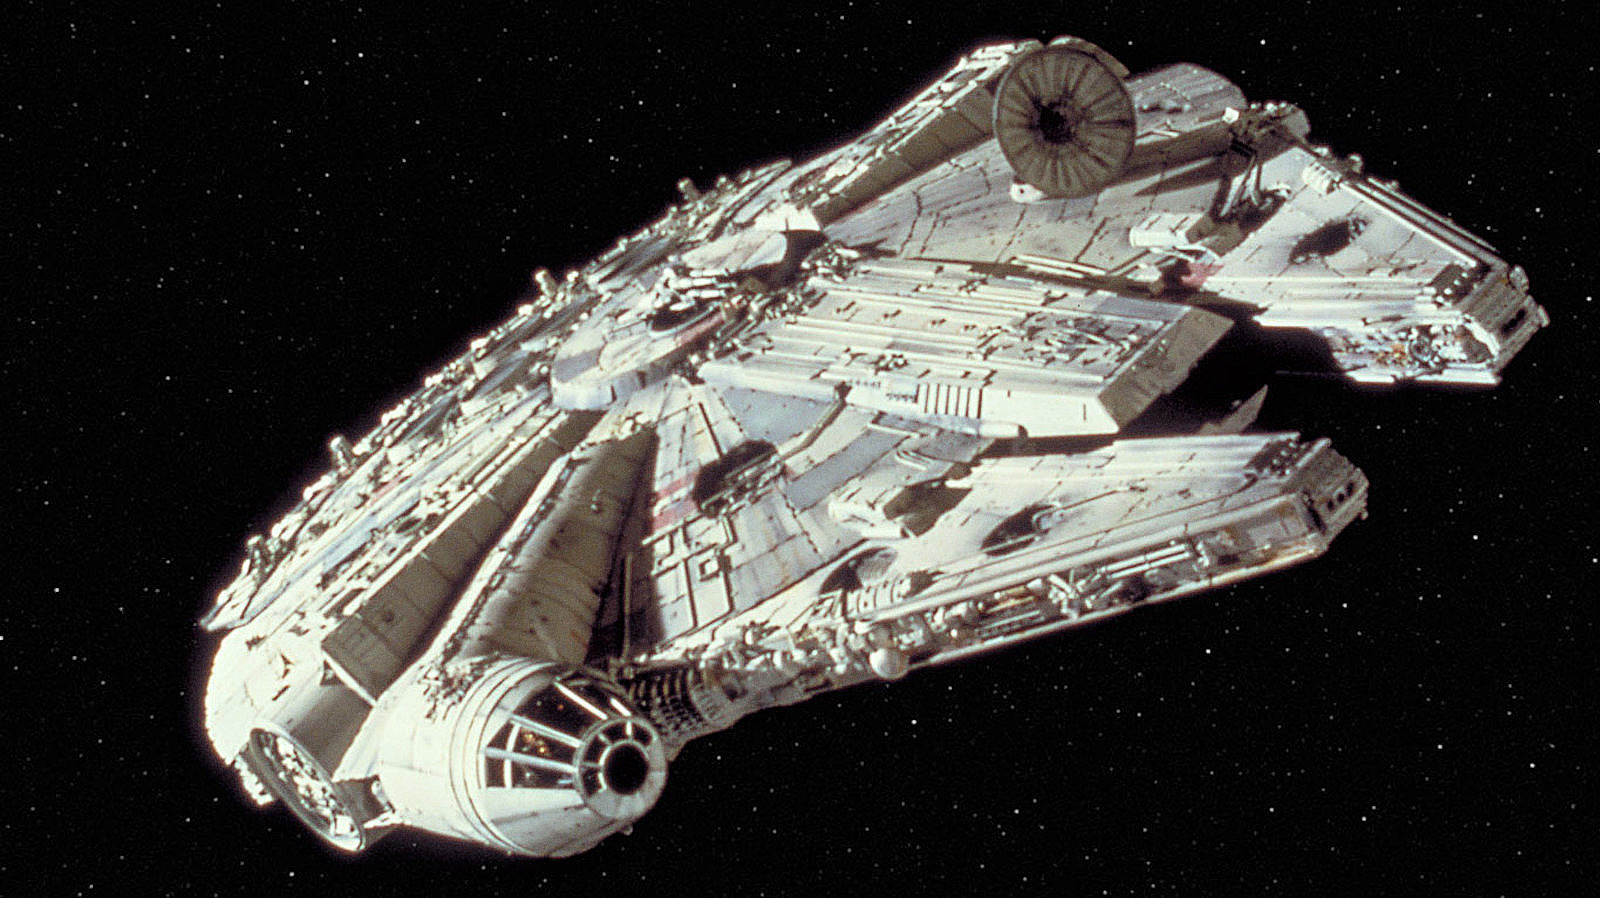 How Some Dirty Dishes Inspired The Look Of Star Wars’ Millennium Falcon – /Film